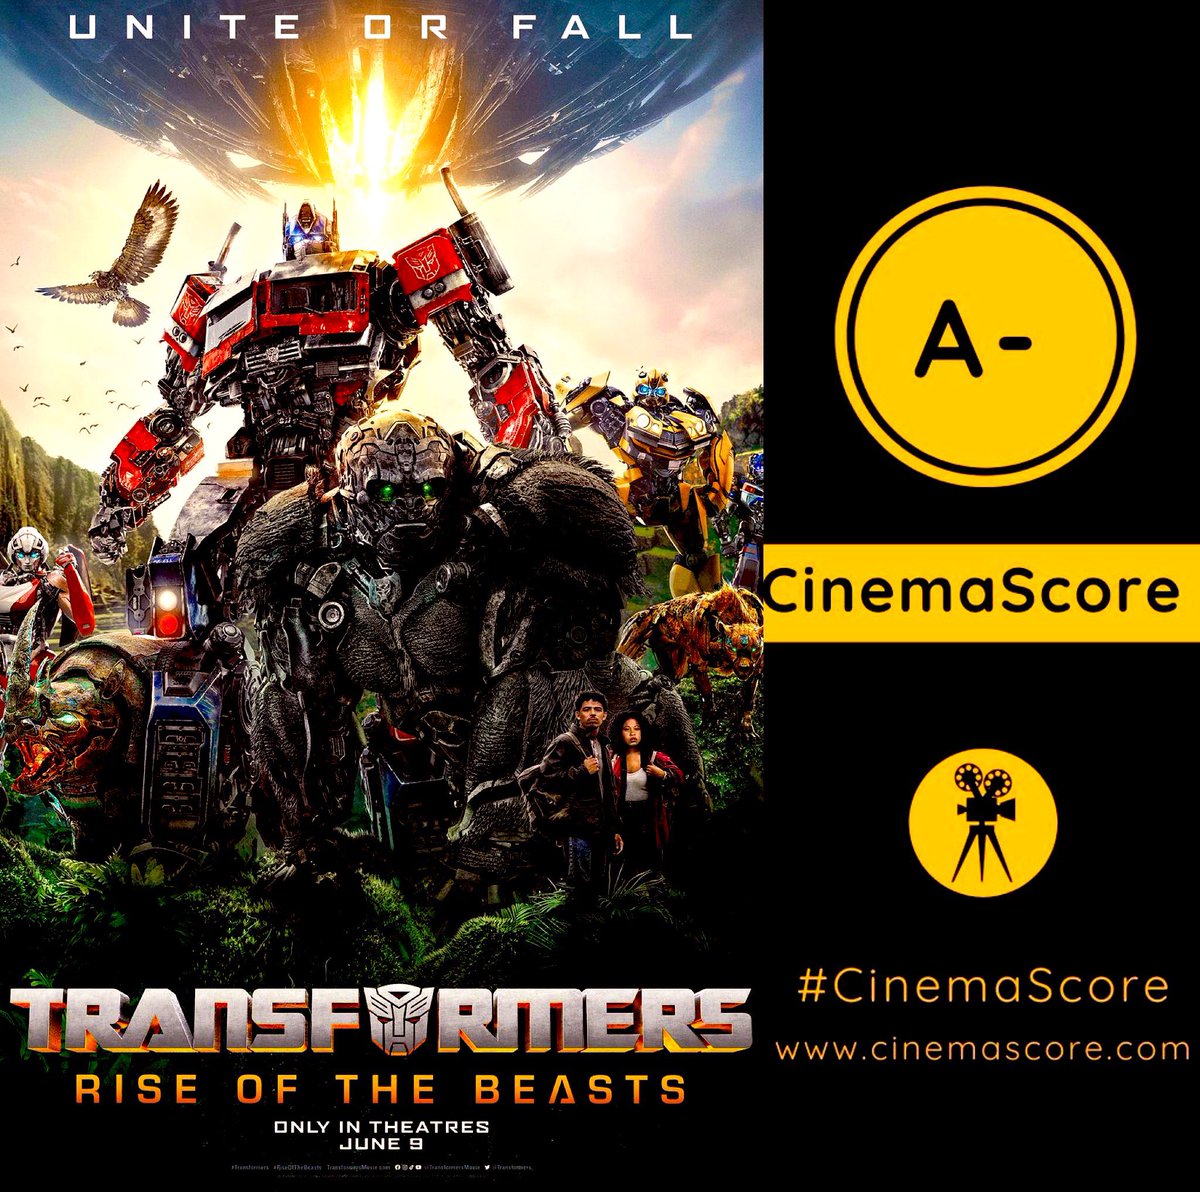 ‘TRANSFORMERS: RISE OF THE BEASTS’ debuts with A- on CinemaScore.

Read our review: bit.ly/DFBeasts